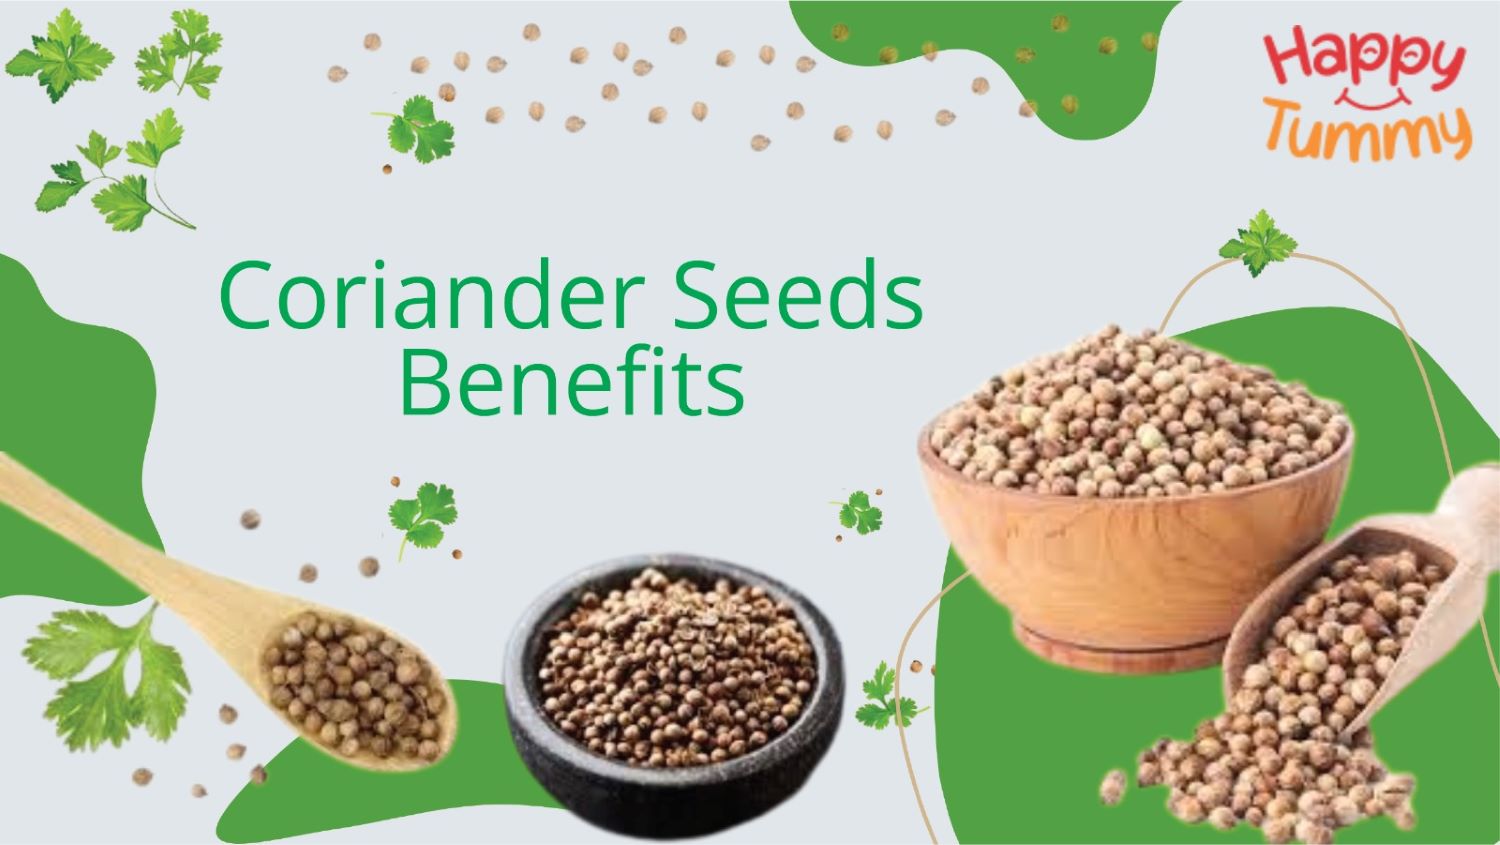 Coriander Seeds Benefits, Uses and Side Effects